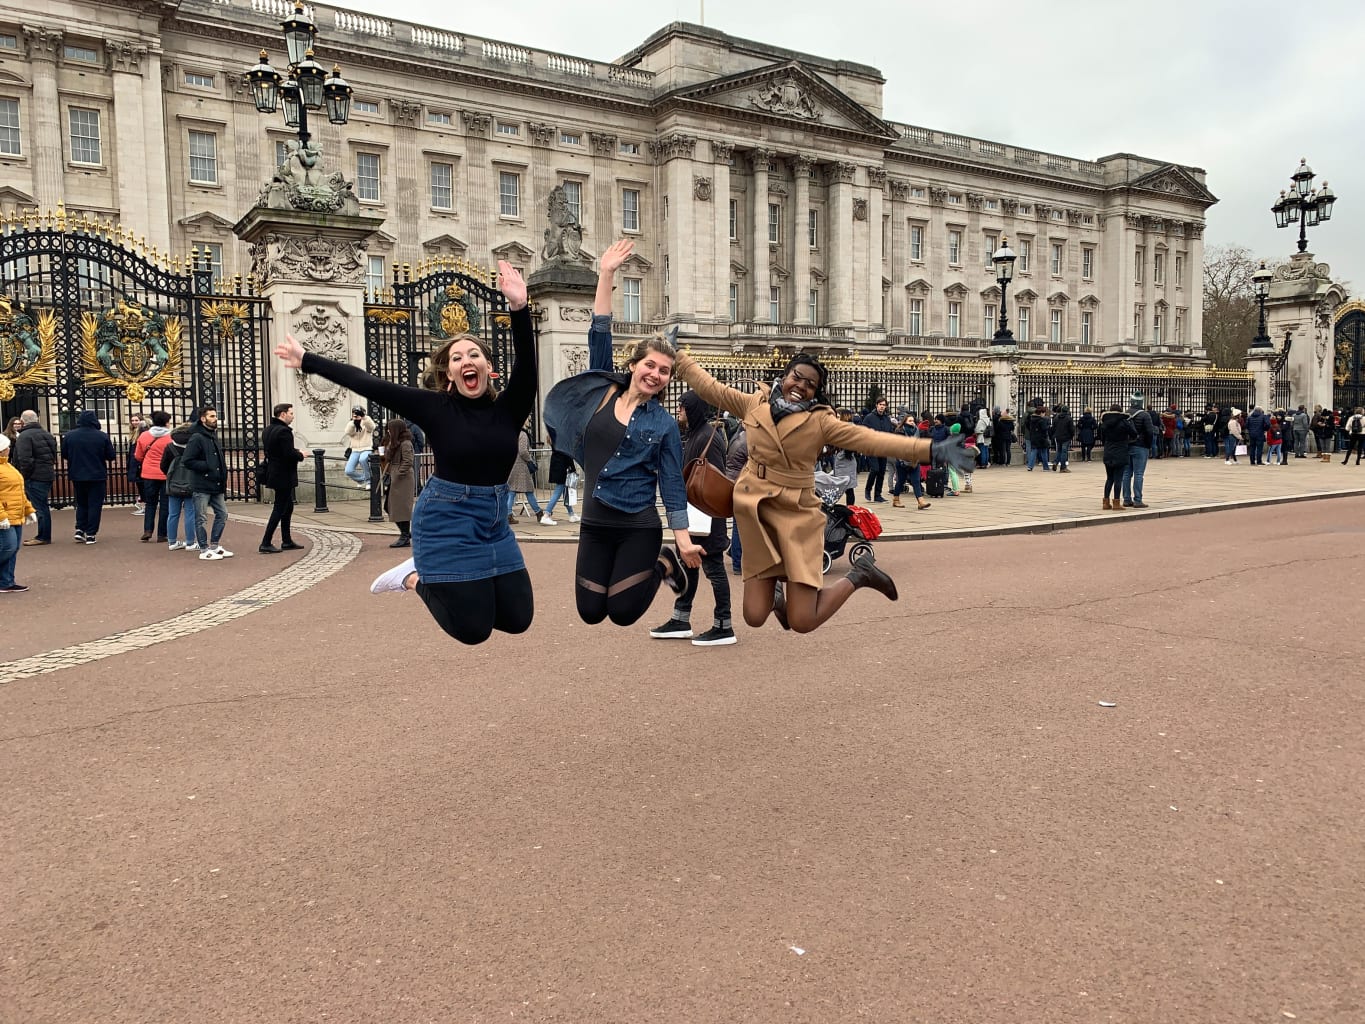 Three women jumping in the air in front of Buckingham Palace in London.